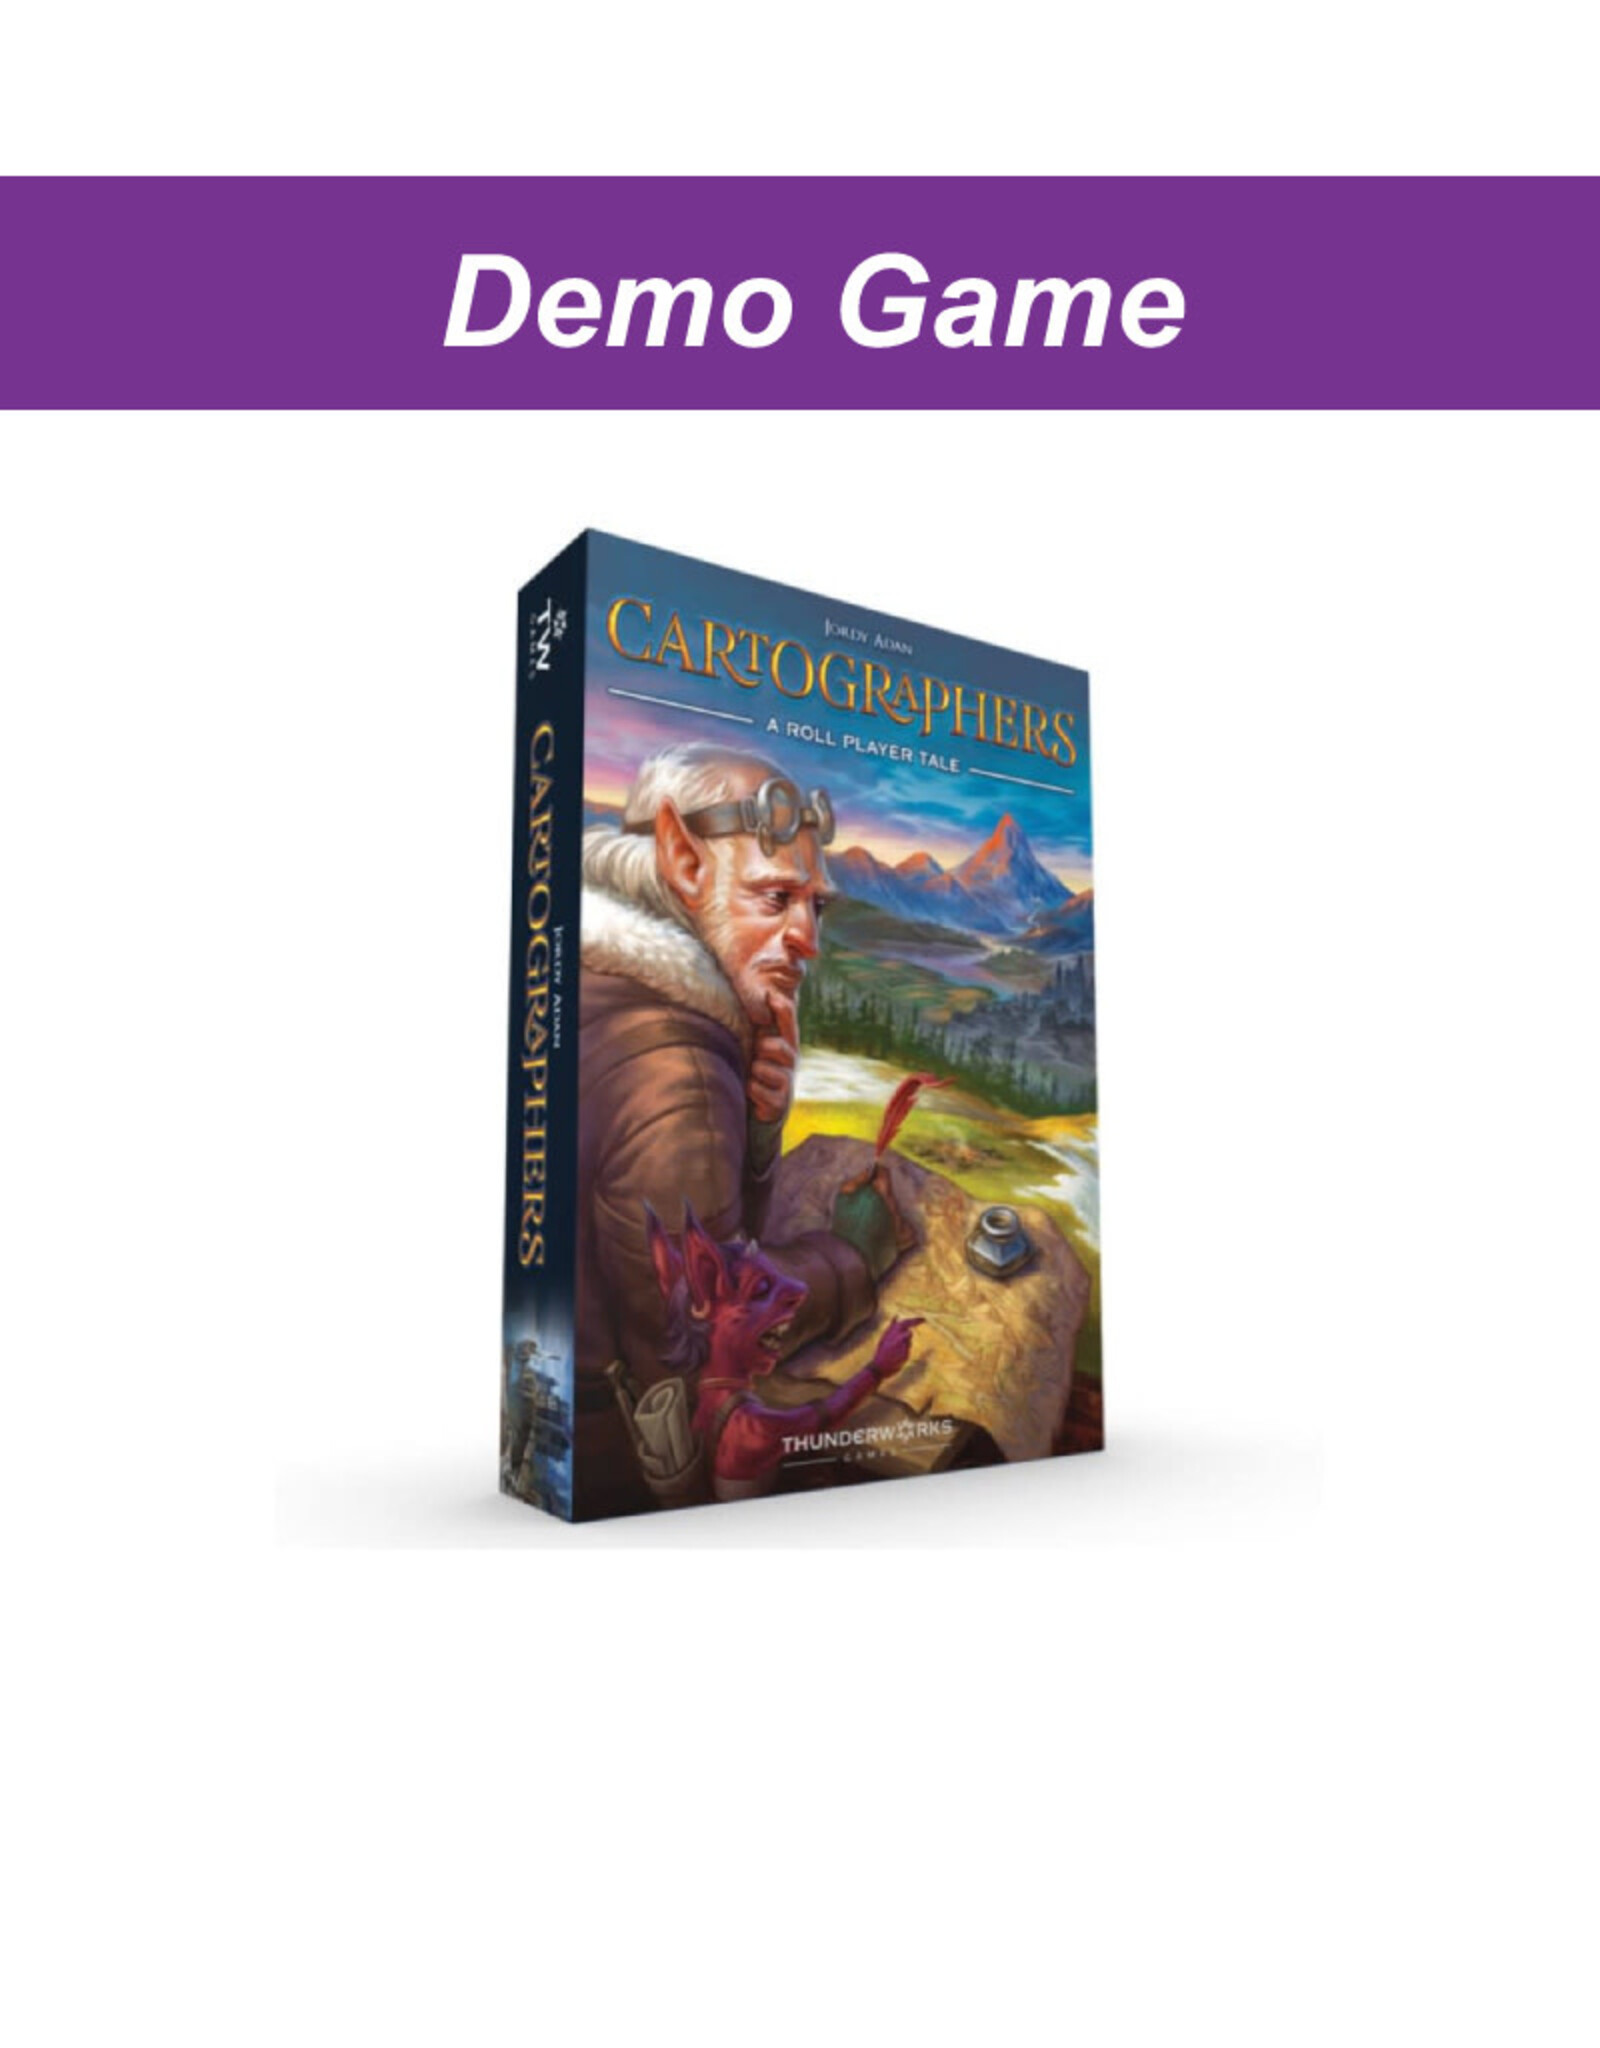 Game Night Games (DEMO) Cartographers. Free to Play In Store!